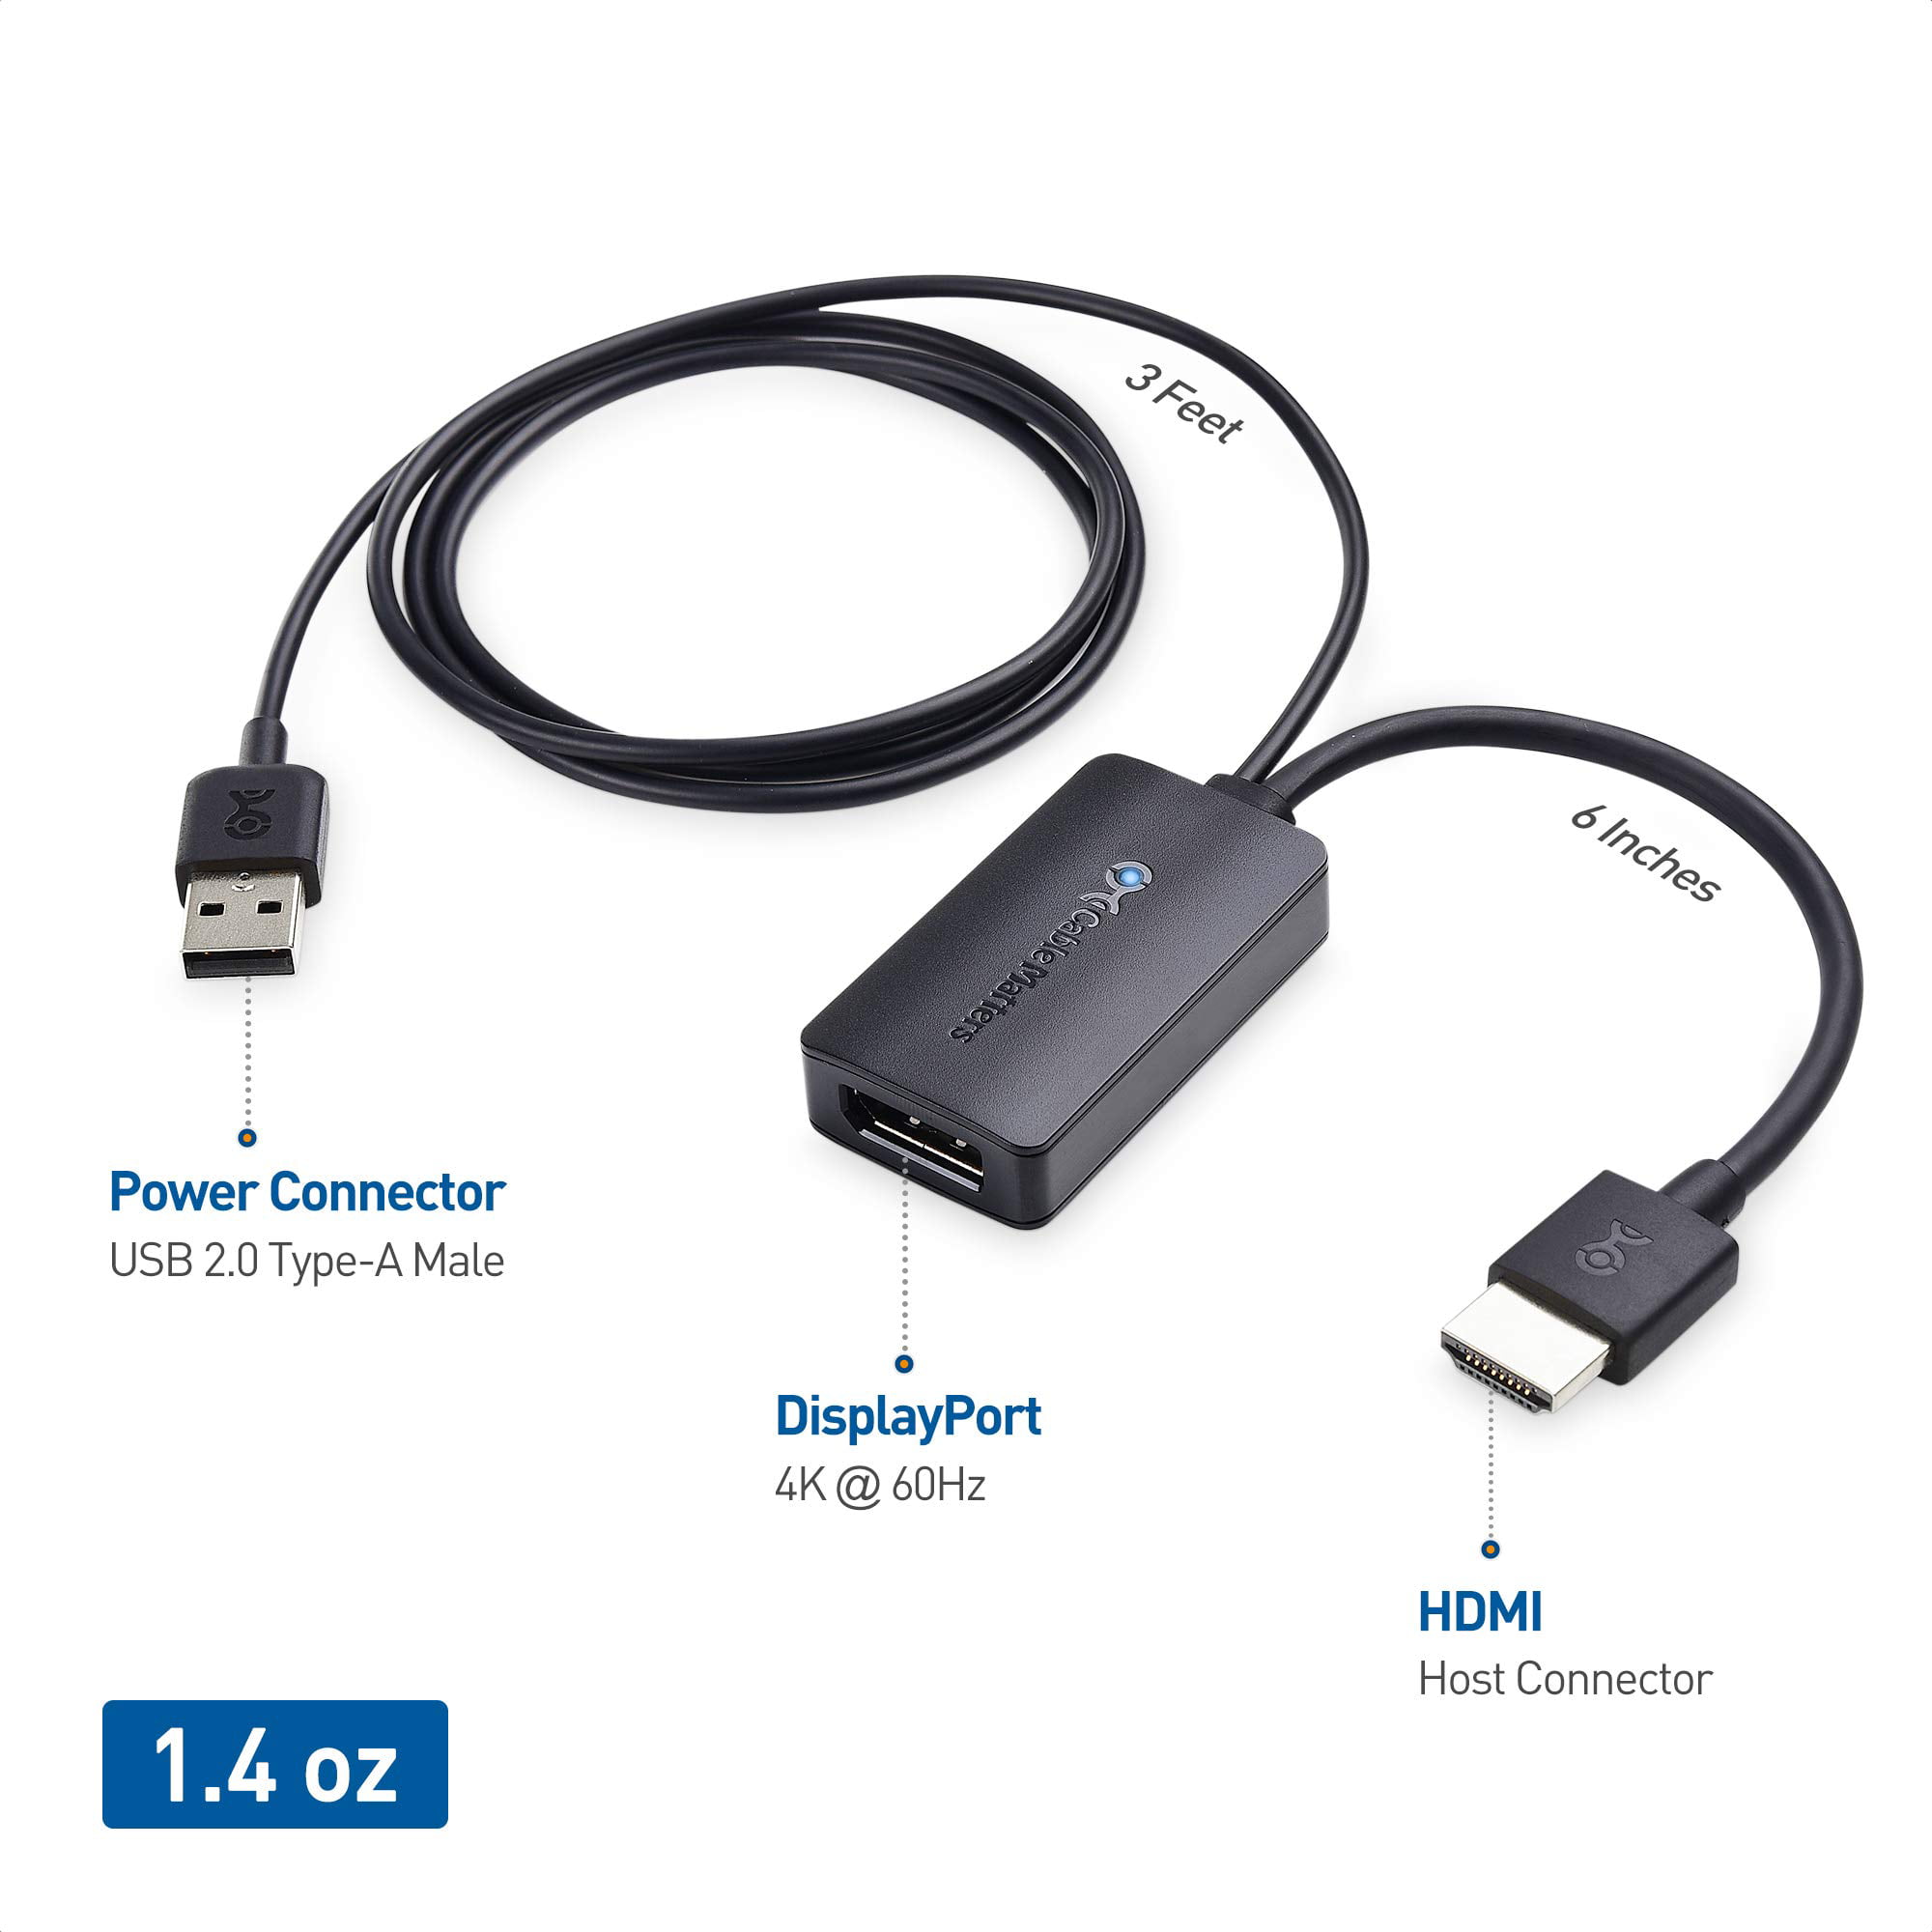 Cable Matters Uni Directional Hdmi To Displayport Adapter For Desktop And Laptop Computers Hdmi 2 0 To Displayport 1 2 With 4k 60hz Video Resolution Not Compatible With Ps5 Or Xbox Series X S